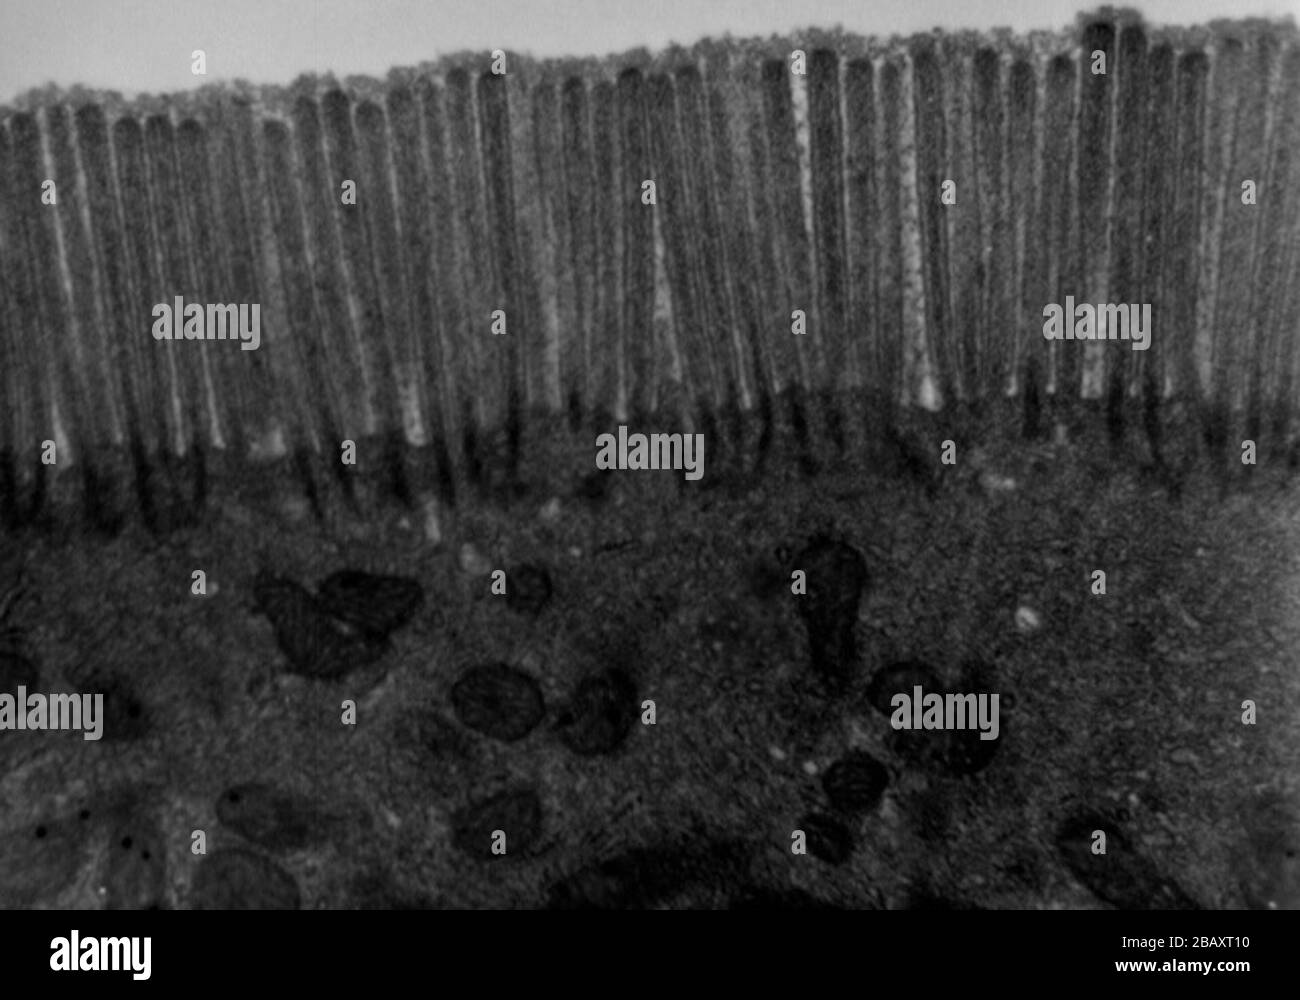 'English: Transmission electron microscope image of a thin section cut through a human jejunum (segment of small intestine) epithelial cell. Image shows apical end of absorptive cell with some of the densely packed microvilli that make up the striated border. Each microvillus is approximately 1um long by 0.1um in diameter and contains a core of actin microfilaments.; http://remf.dartmouth.edu/images/humanMicrovilliTEM/source/1.html; Louisa Howard, Katherine Connollly - Dartmouth Electron Microscope Facility; ' Stock Photo